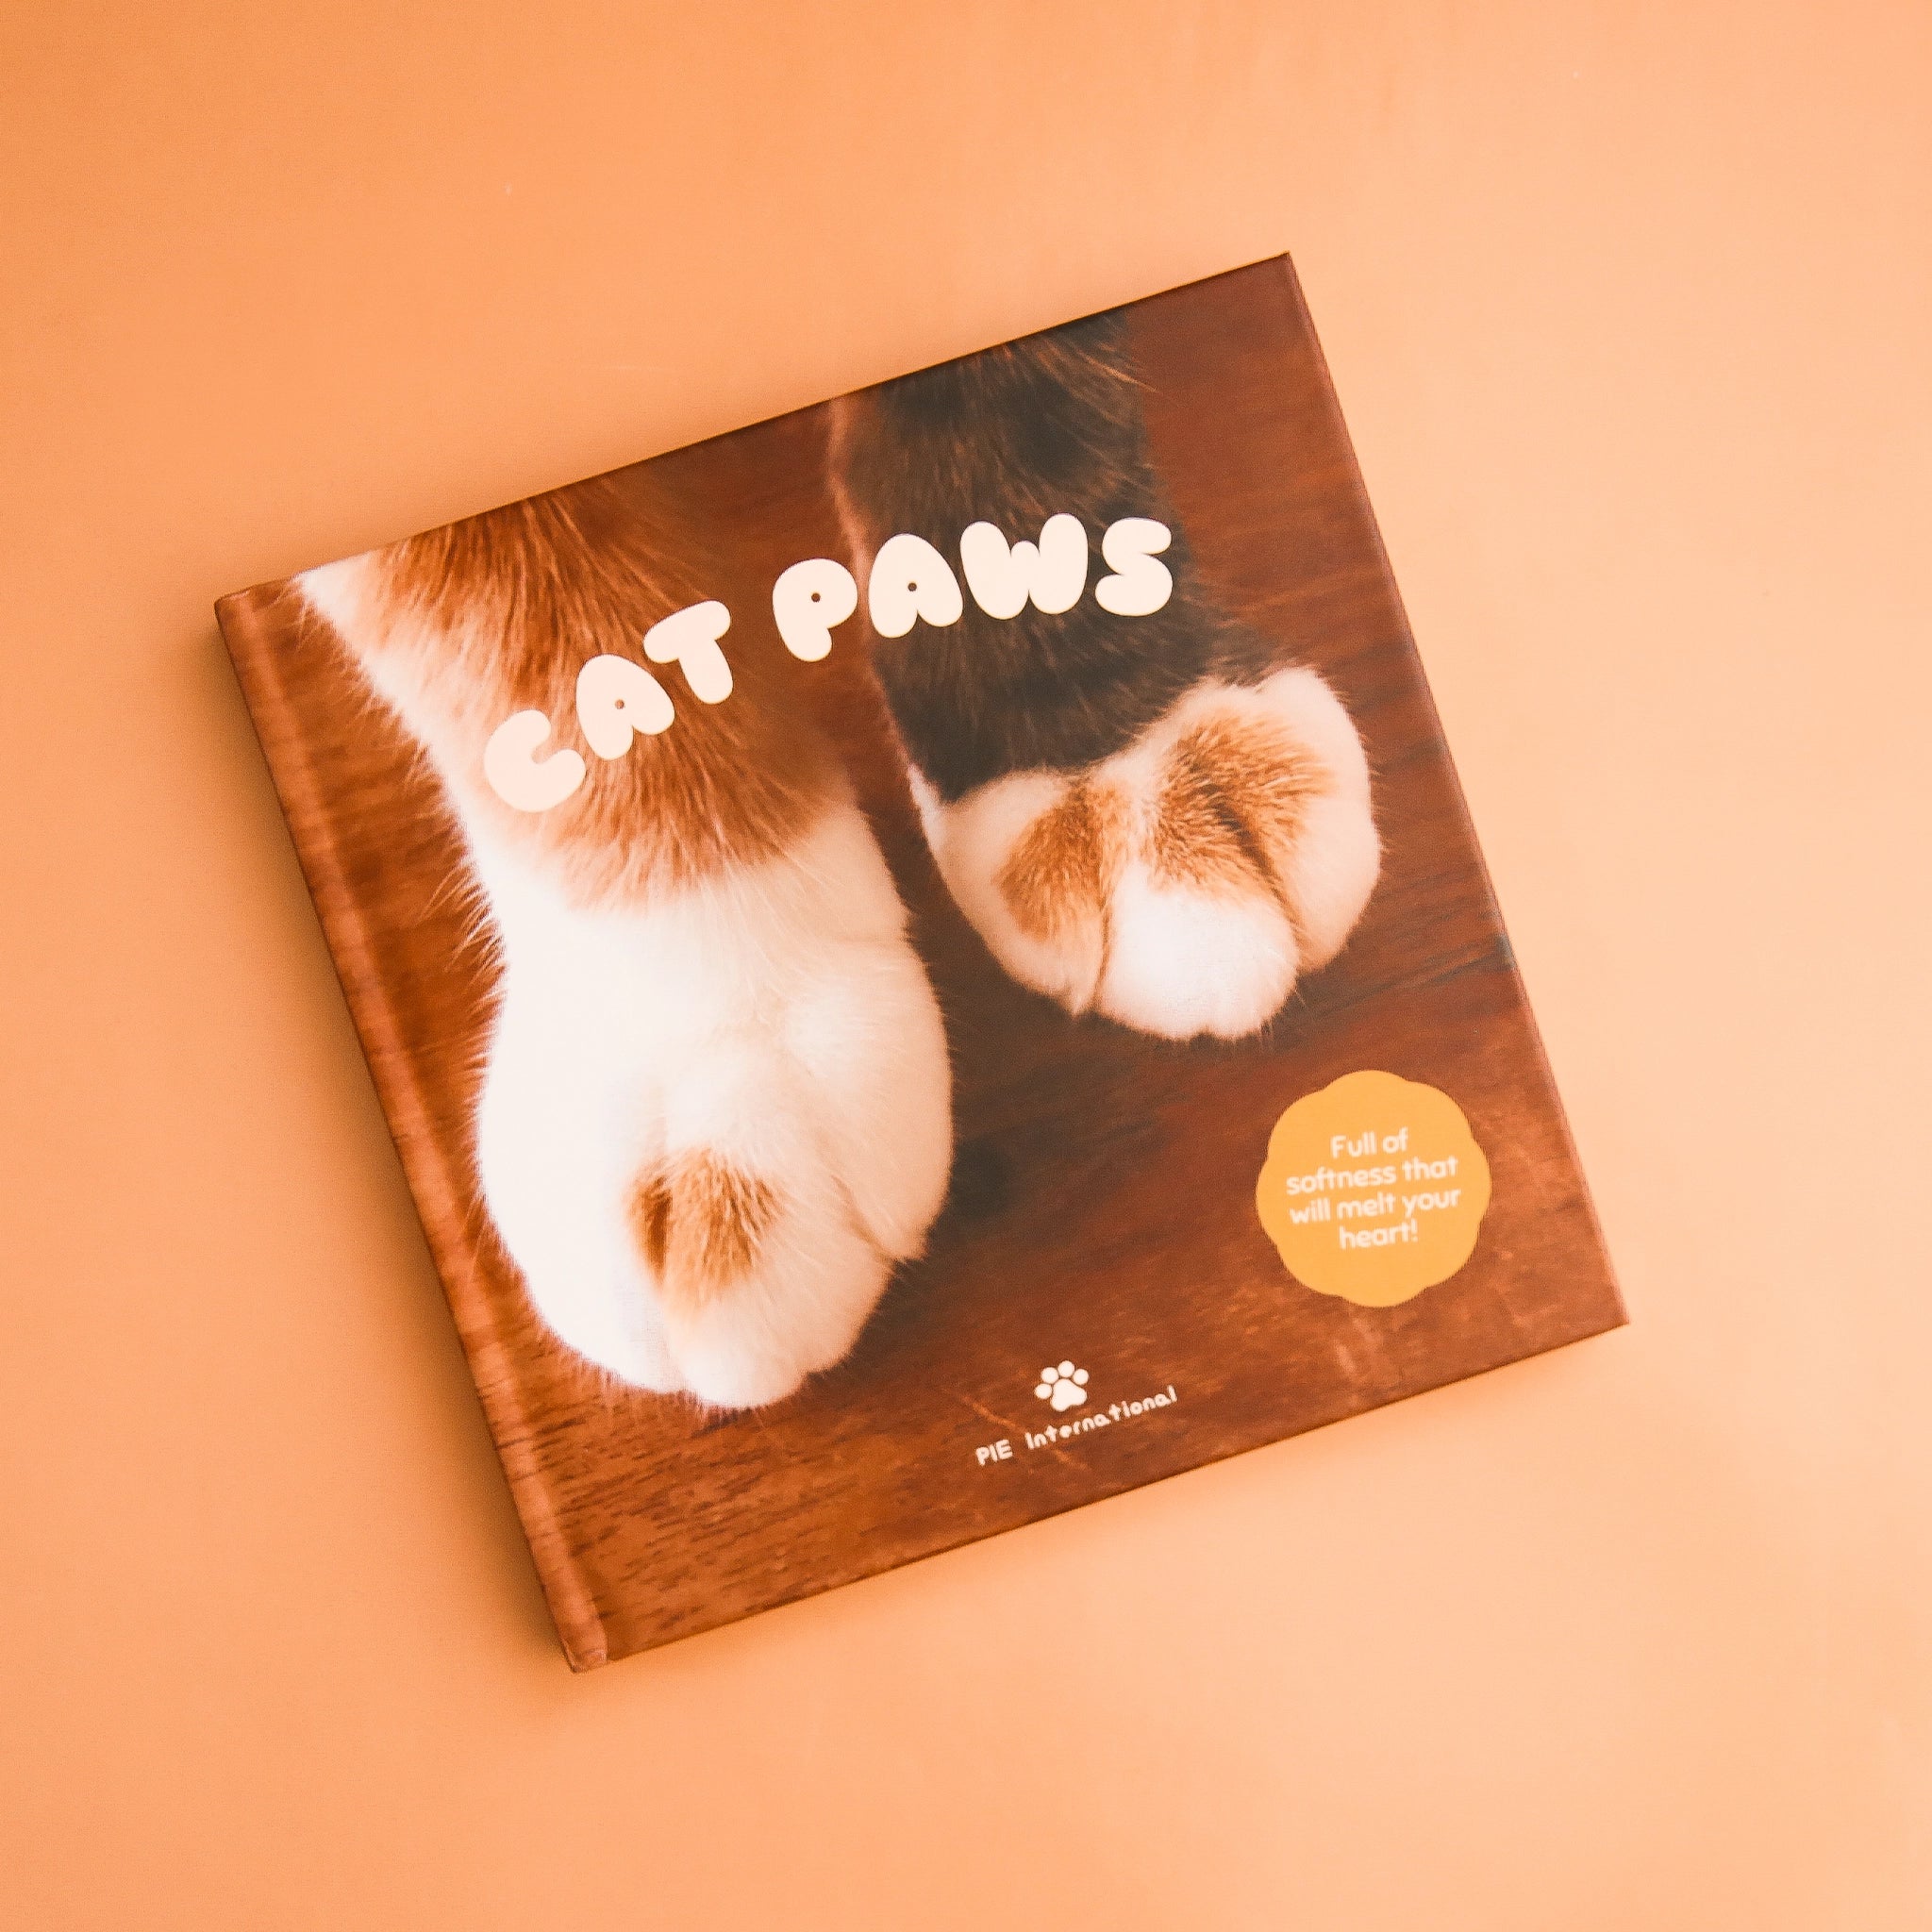 On a peach background is a book cover featuring a photograph of cat paws against a wood floor along with the title, &quot;Cat Paws&quot;, &quot;Full of softness that will melt your heart!&quot;.